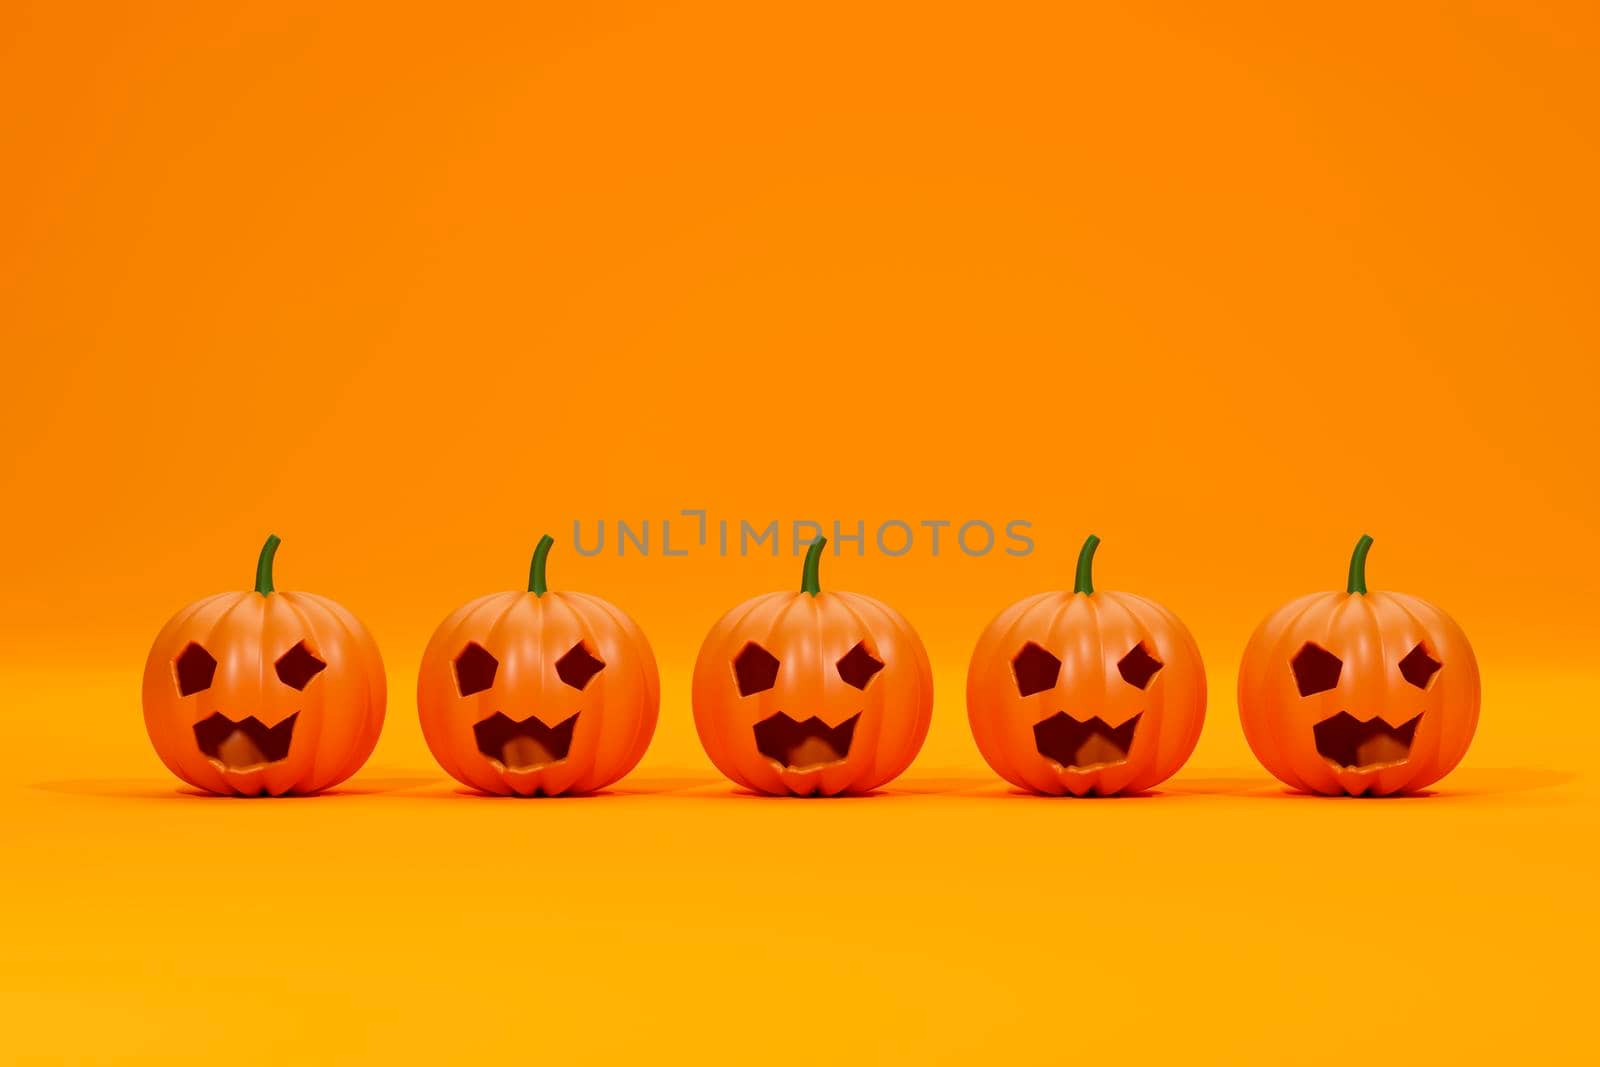 Pumpkins standing in a row. 3d illustration. by raferto1973